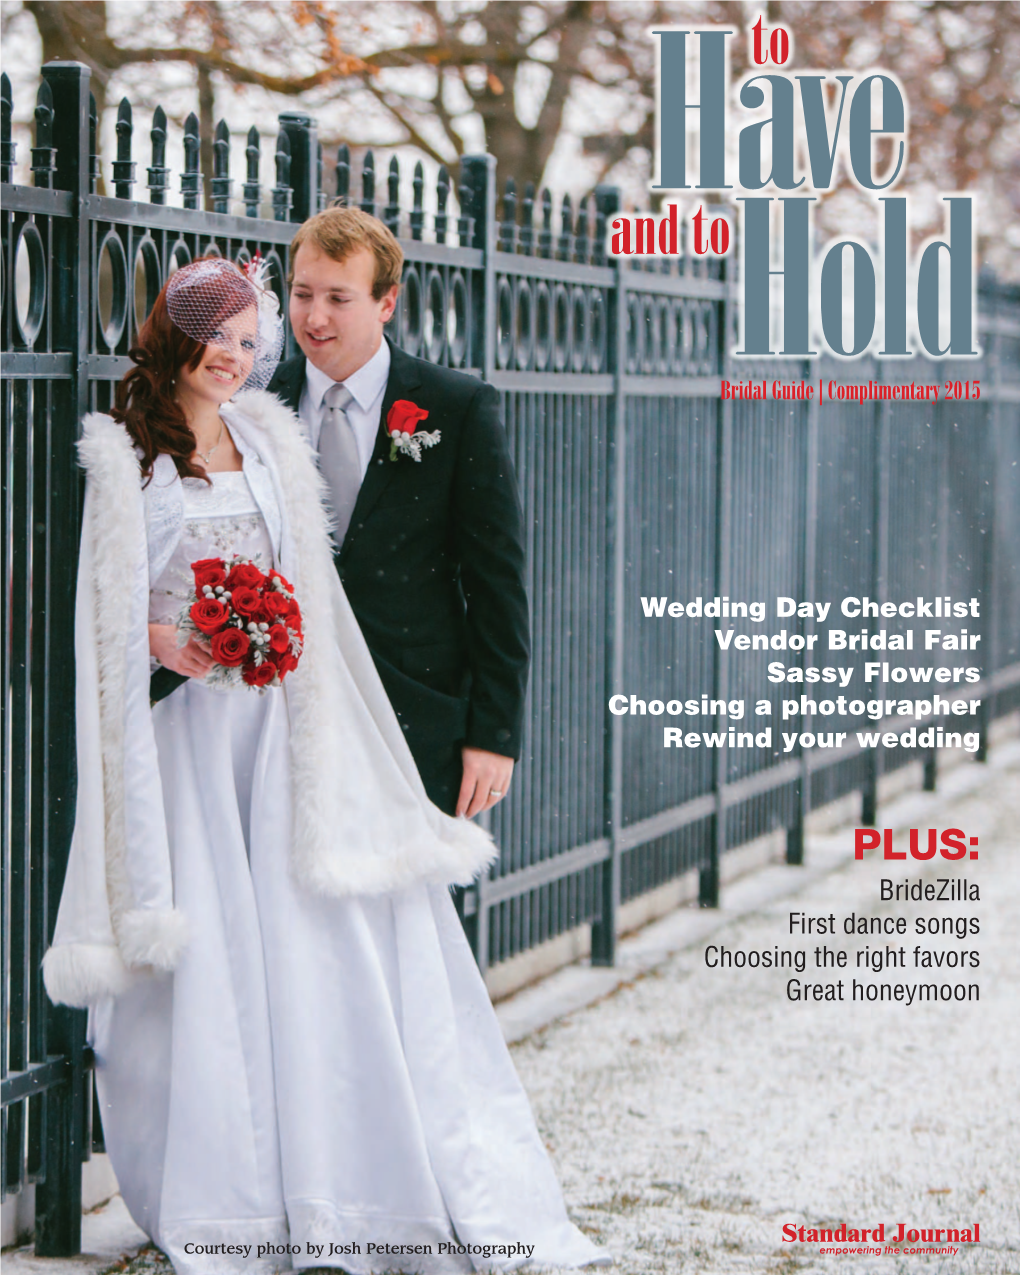 To and Tohold Bridal Guide|Complimentary 2015